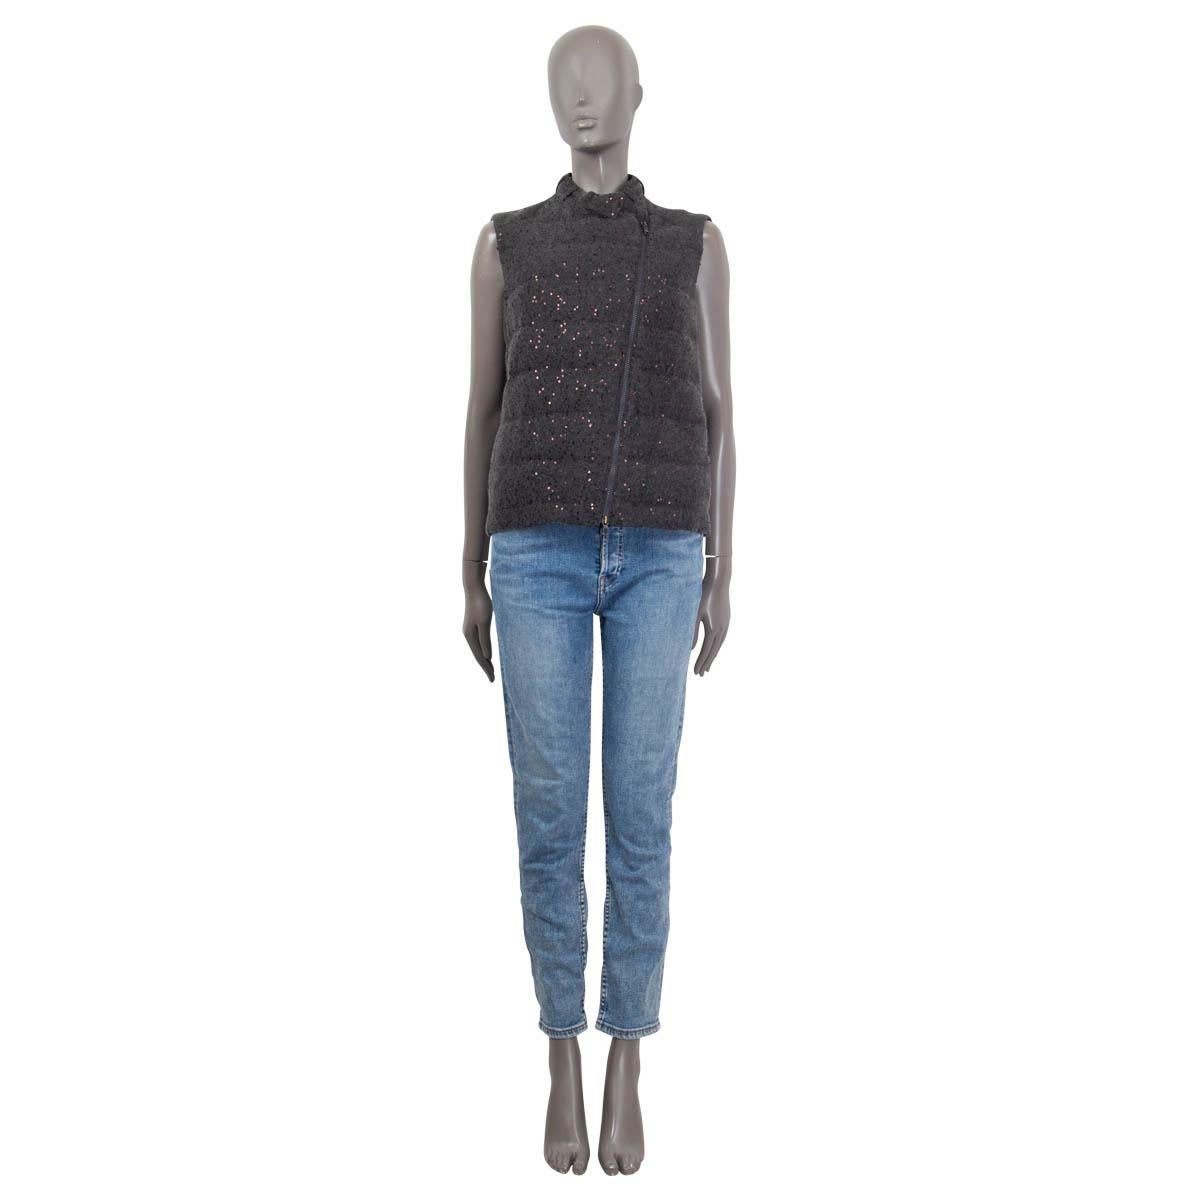 100% authentic Brunello Cucinelli sequin embellished down jacket in gray cashmere (70%) and silk (30%). Features two slit pockets on the sides. Opens with a button at the neck and an asymmetric zipper on the front. Lined in gray nylon (100%). Has